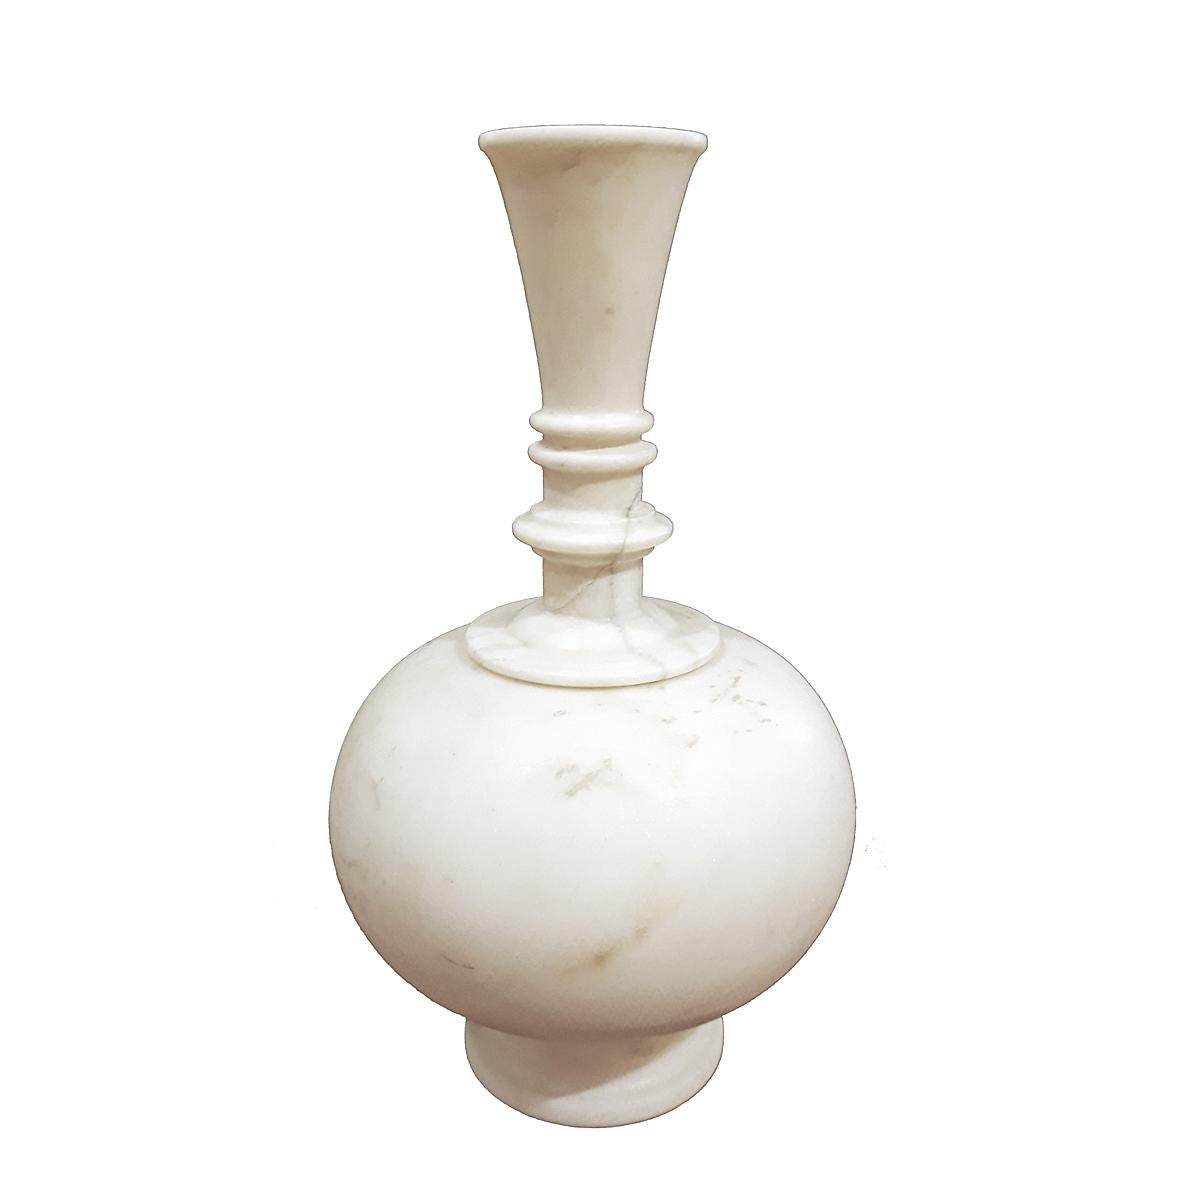 A sleek, elegant marble vase with fluted neck. Statuary marble, hand-crafted in India, late 20th century. 
It has two separate pieces, which gives the vessel the versatility to become a short round vase, or a long one. 
Measures: 12 inches high, 7